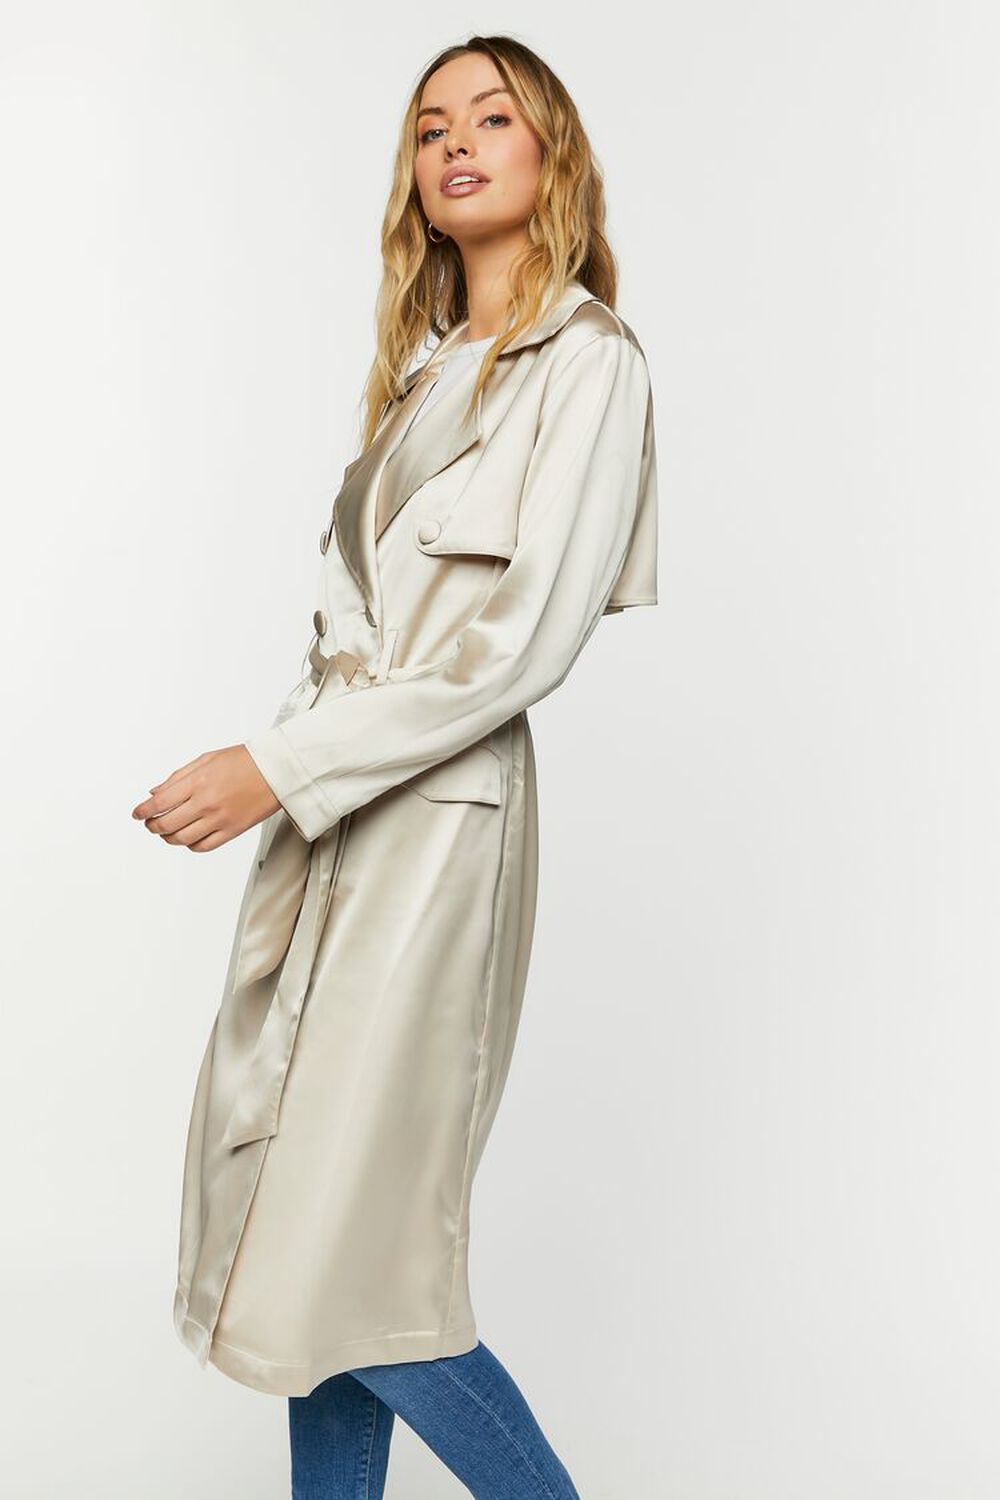 GREY Satin Double-Breasted Trench Coat, image 2